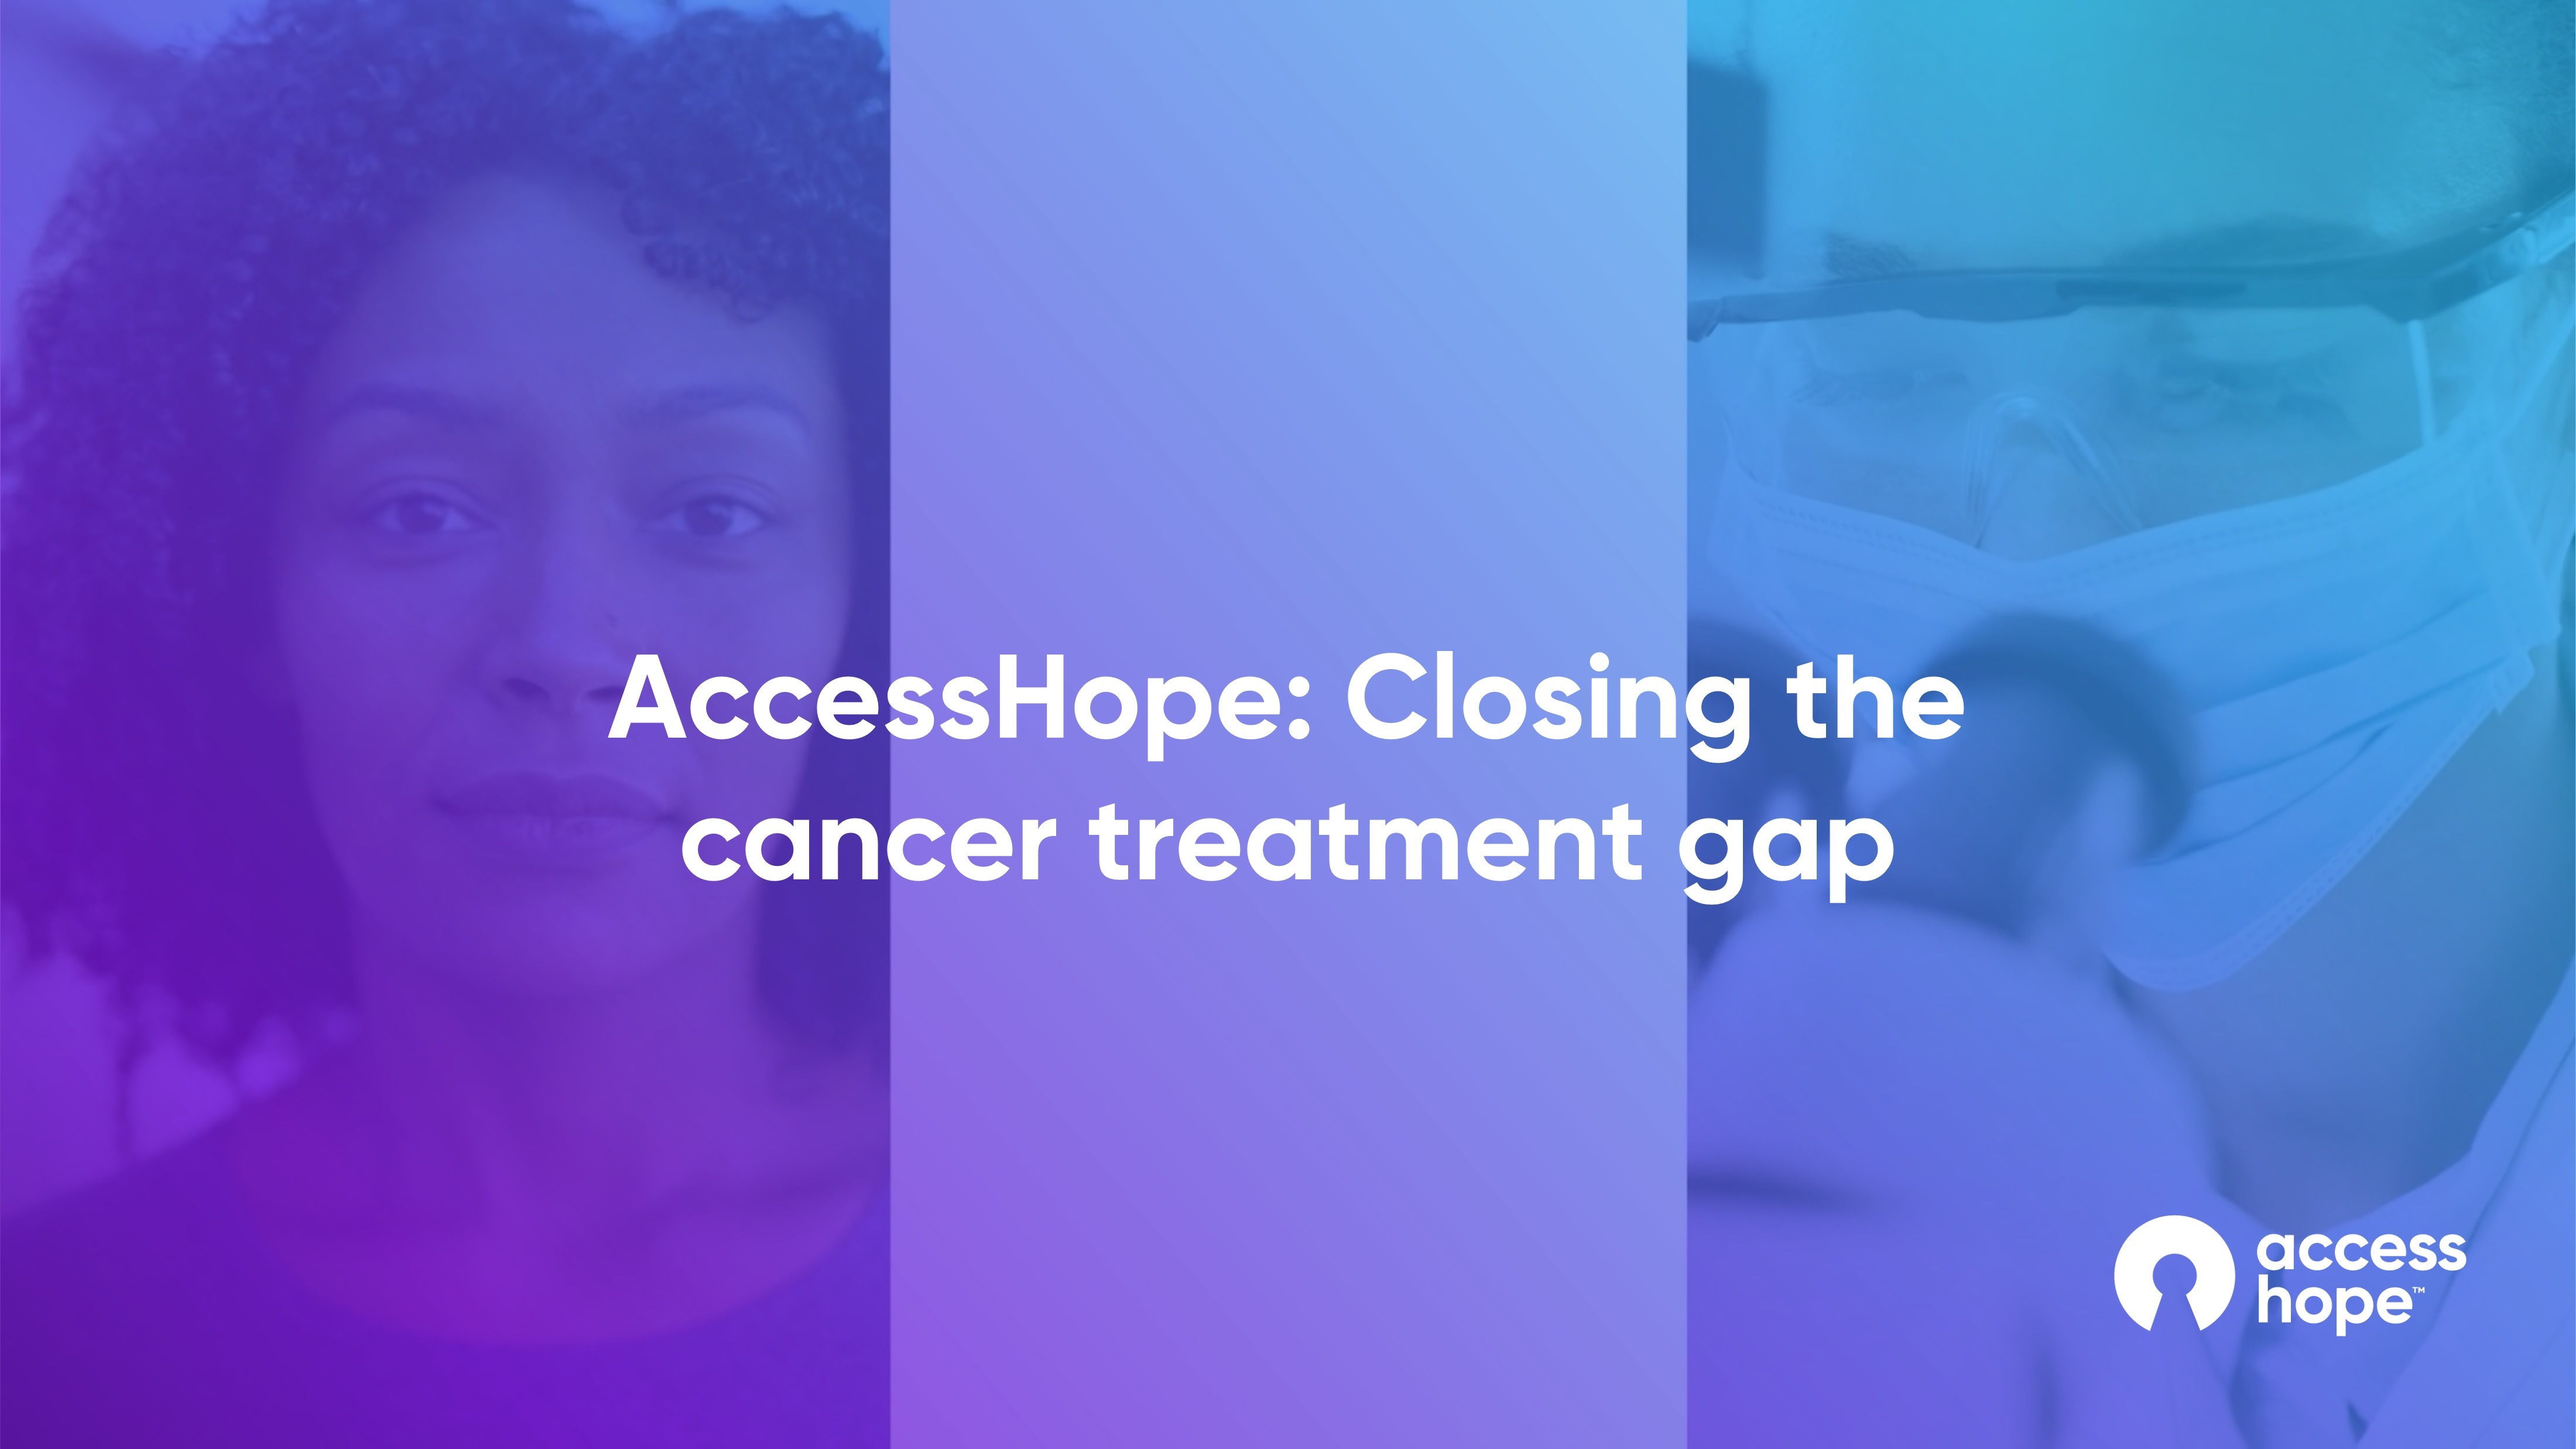 Video open closing the cancer treatment gap